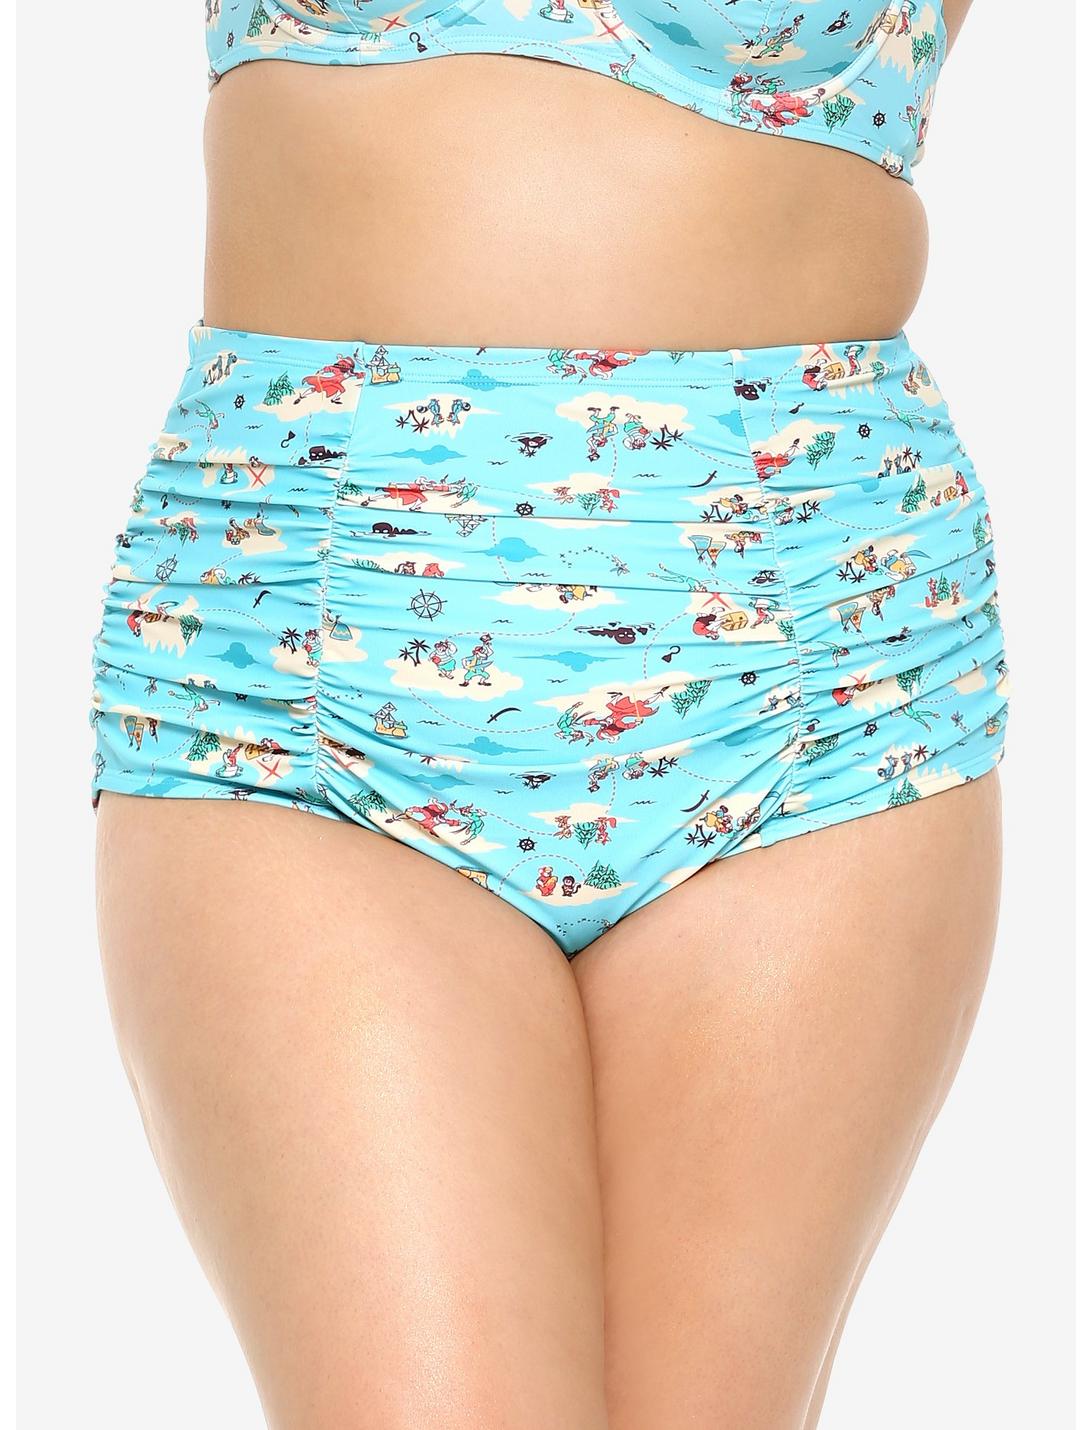 Disney Peter Pan Never Land Map High-Waisted Ruched Swim Bottoms Plus Size, MULTI, hi-res